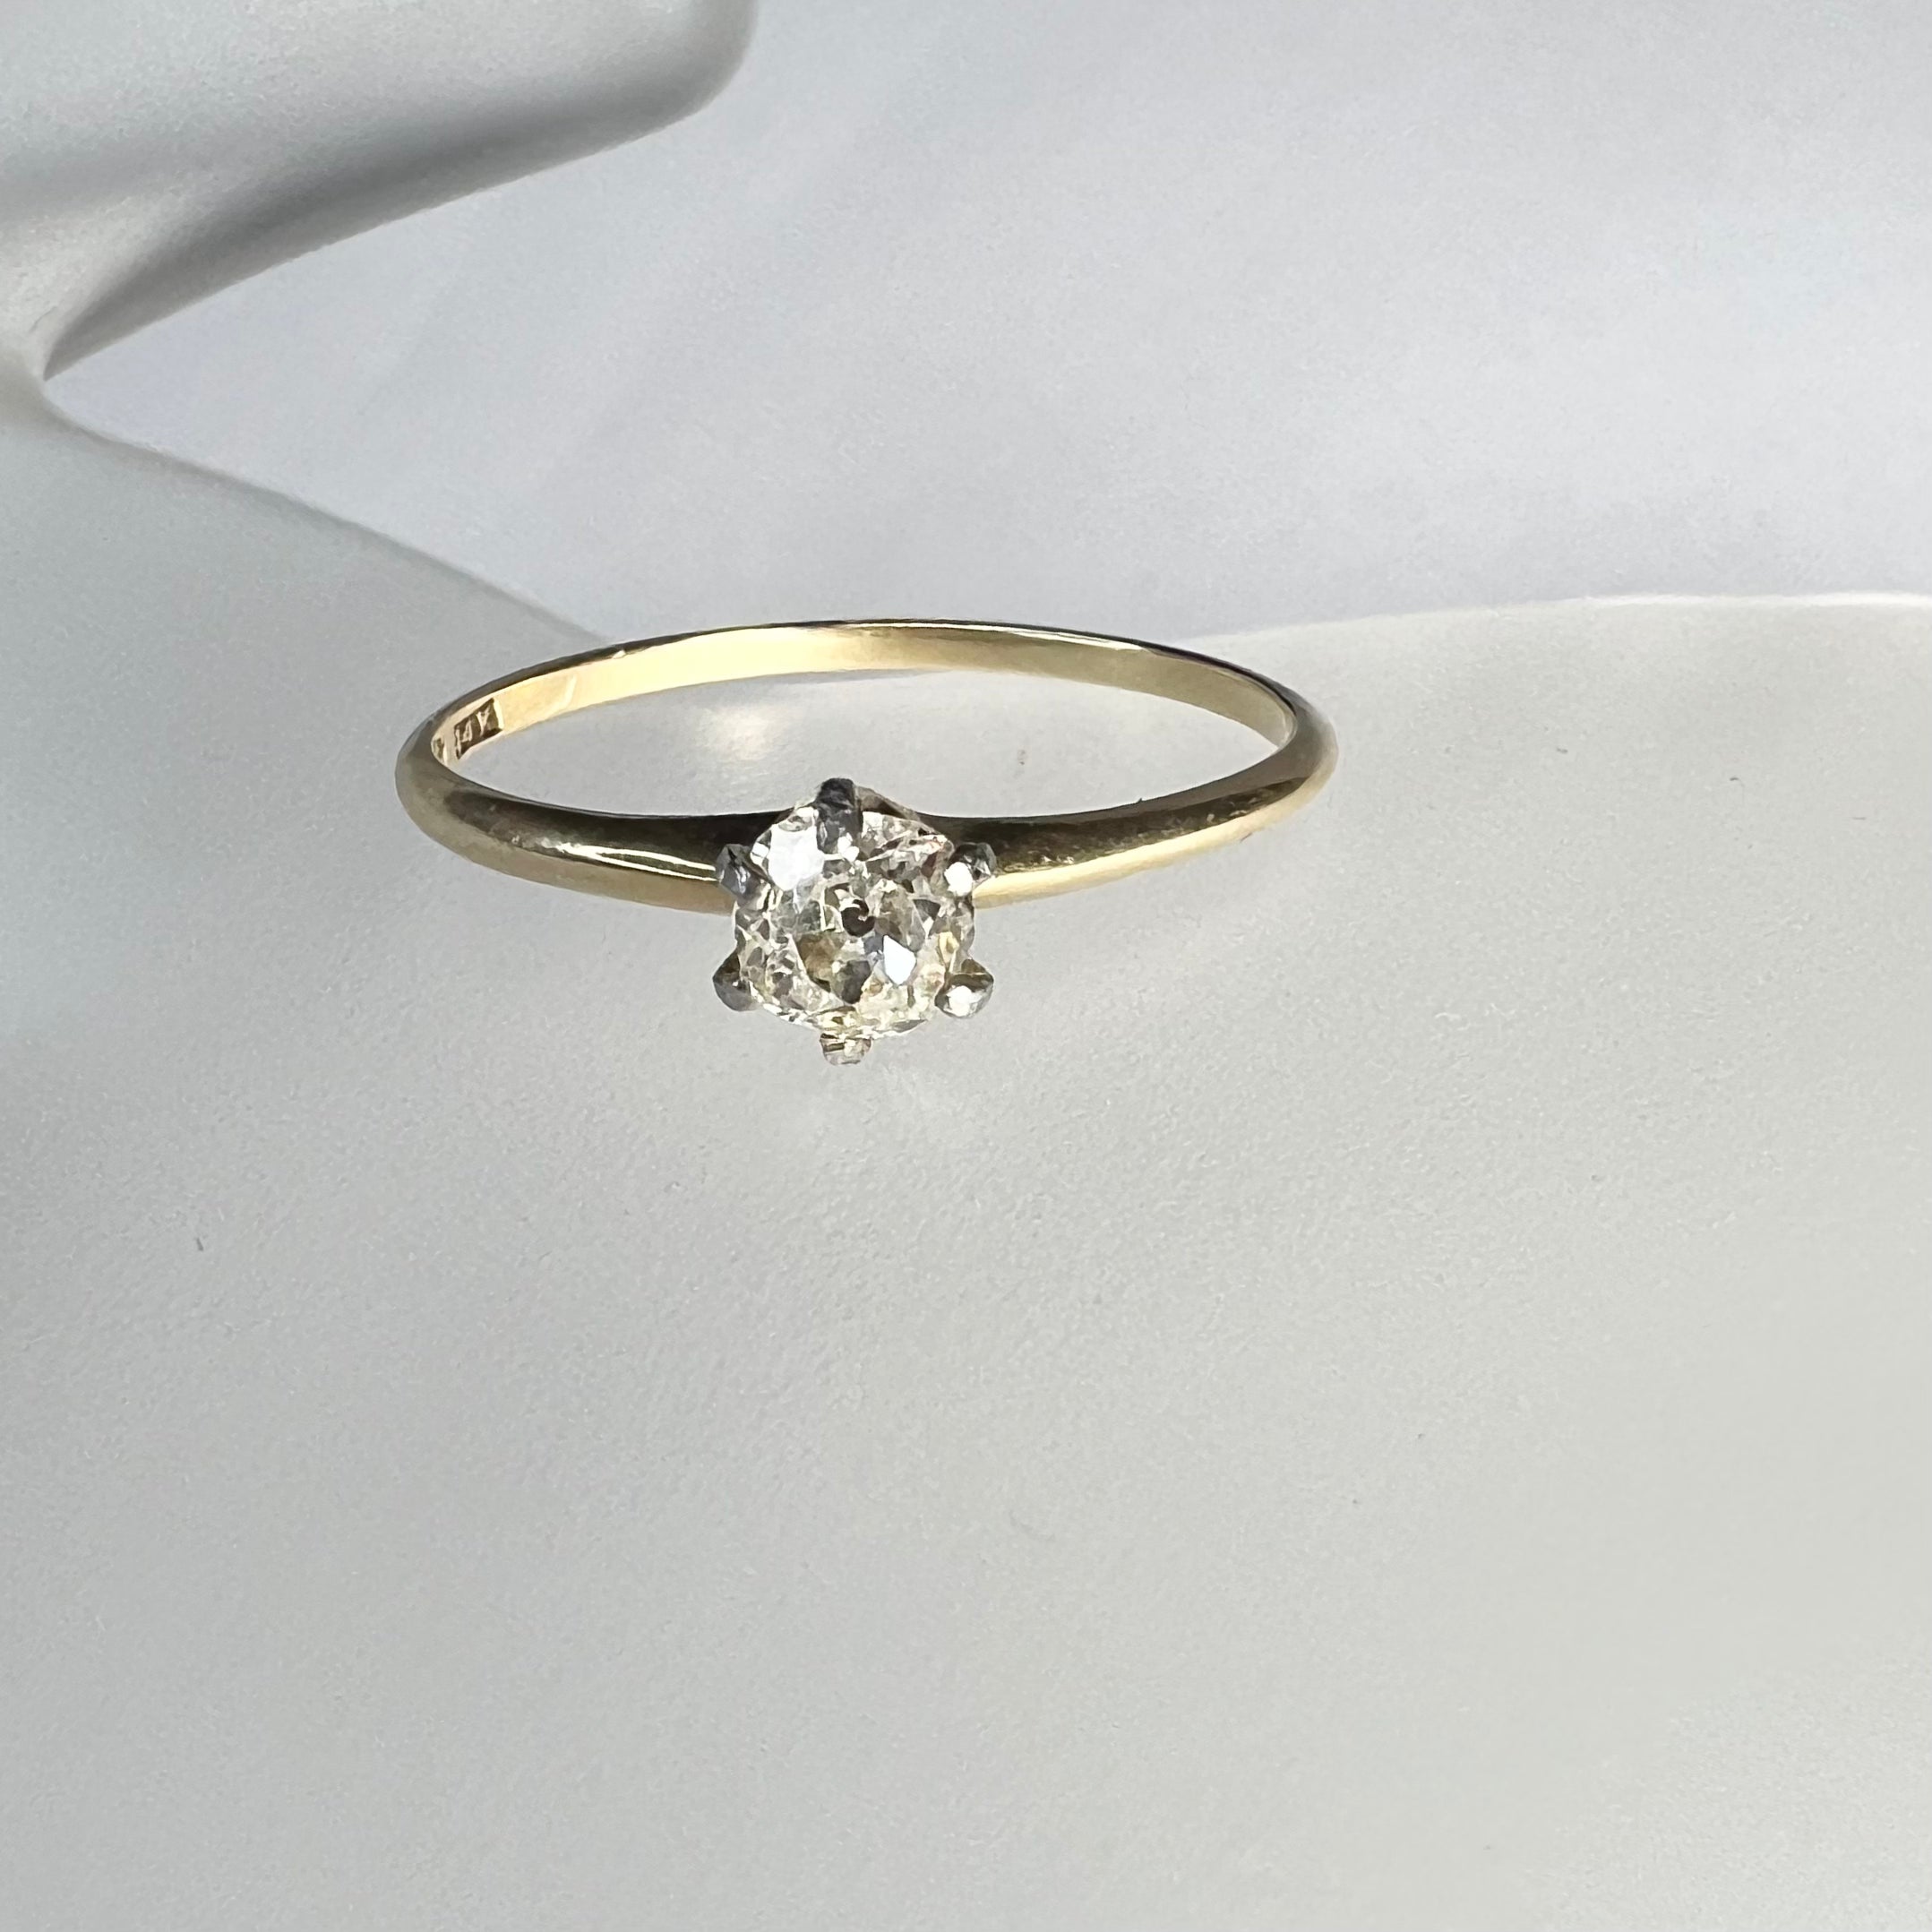 Solid 14K Yellow Gold Solitaire Diamond Ring Band Size 8.25